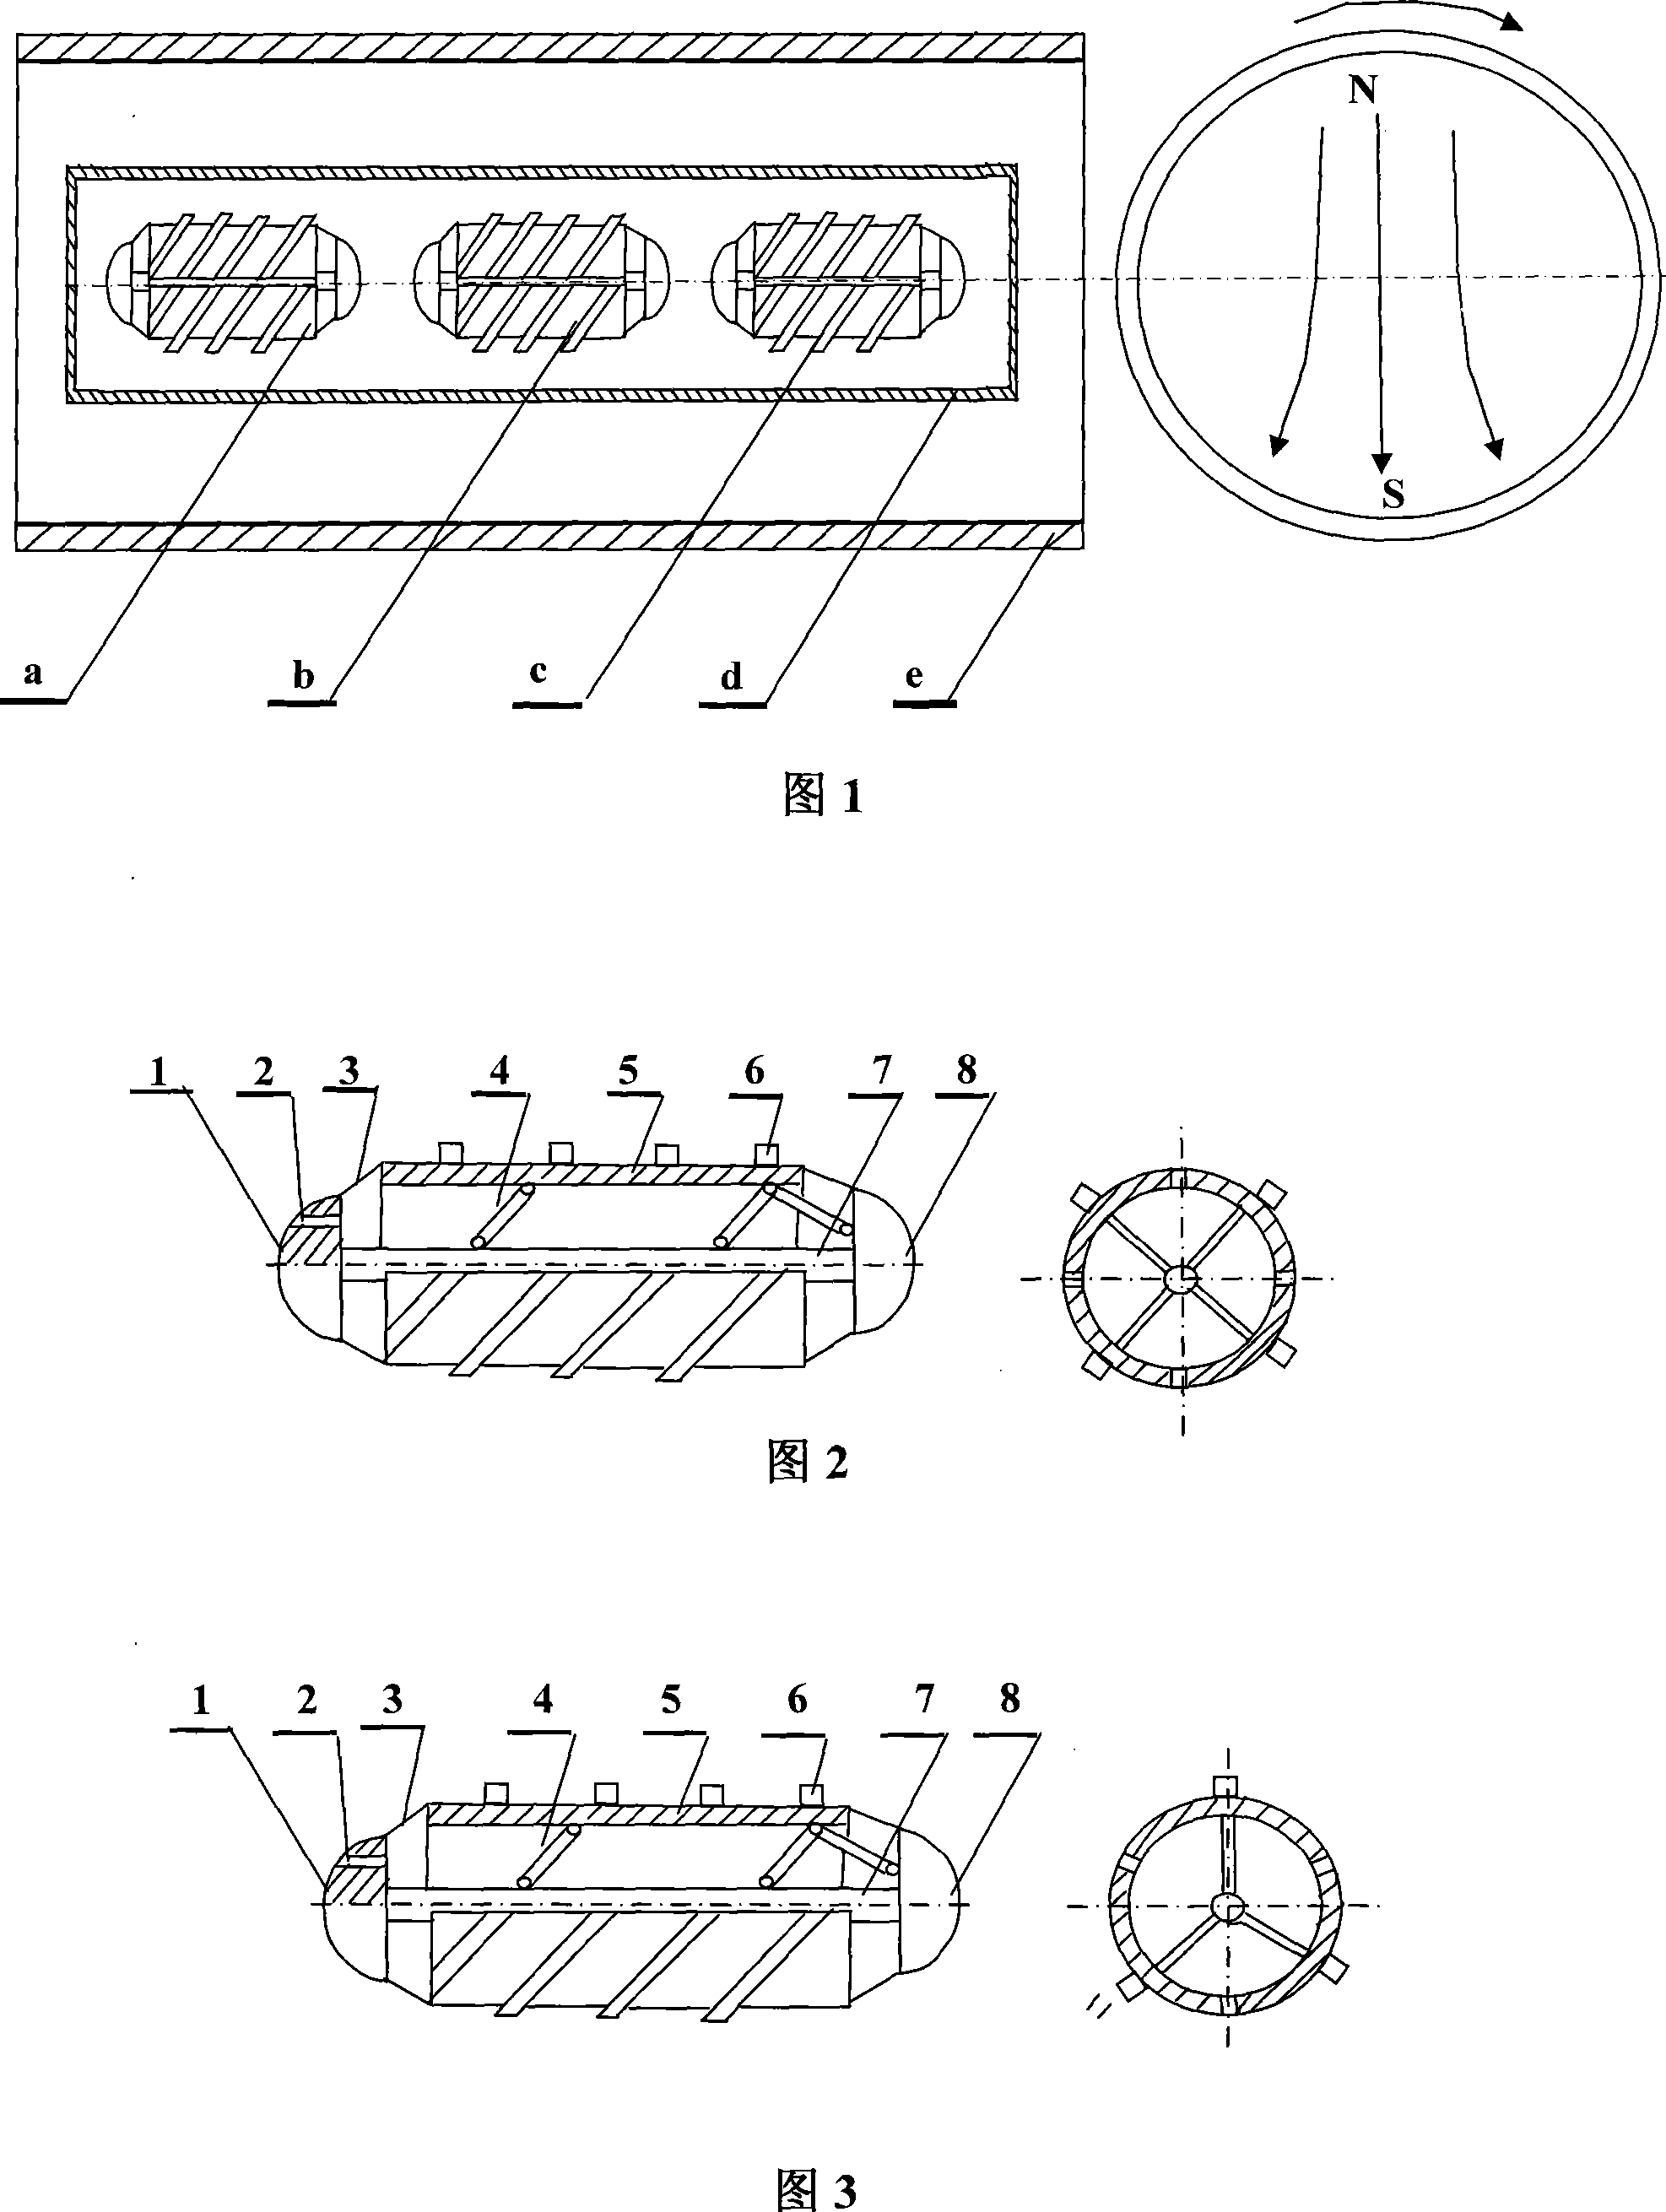 Magnetic driving control device and method for multi-capsule type medical miniature robot